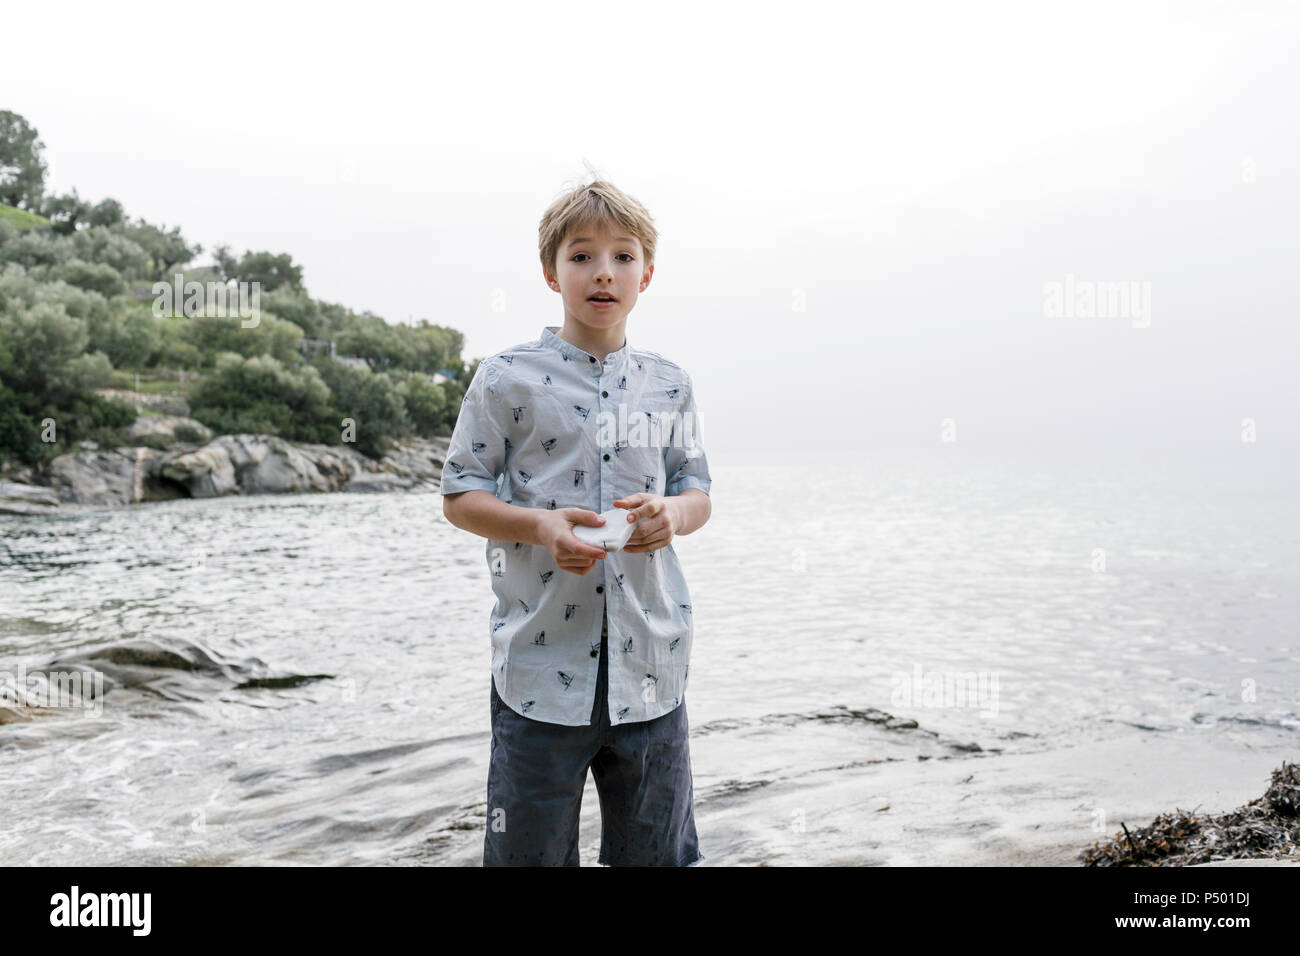 Greece, Chalkidiki, portrait of blond boy standing in front of the sea holding stone Stock Photo